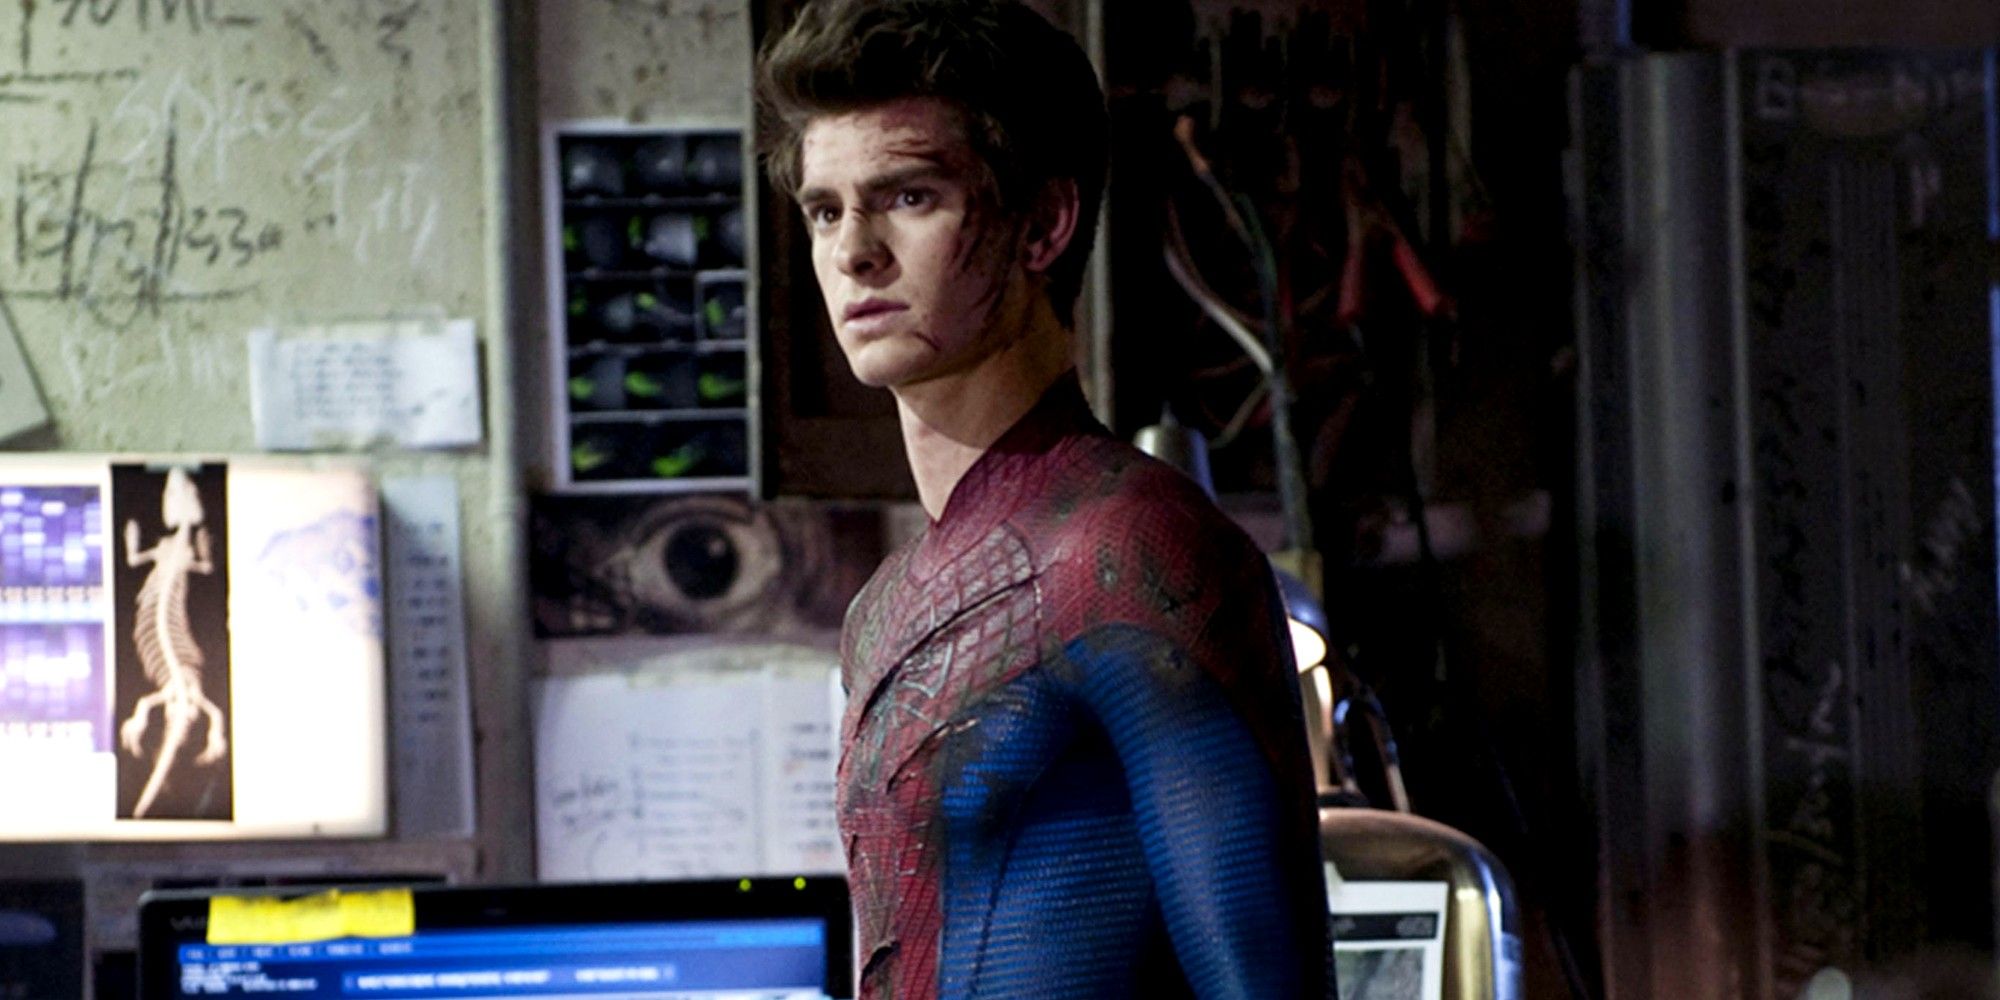 Andrew-Garfield-as-Spider-Man-The-Amazing-Spider-Man-Connors-Laboratory.jpg